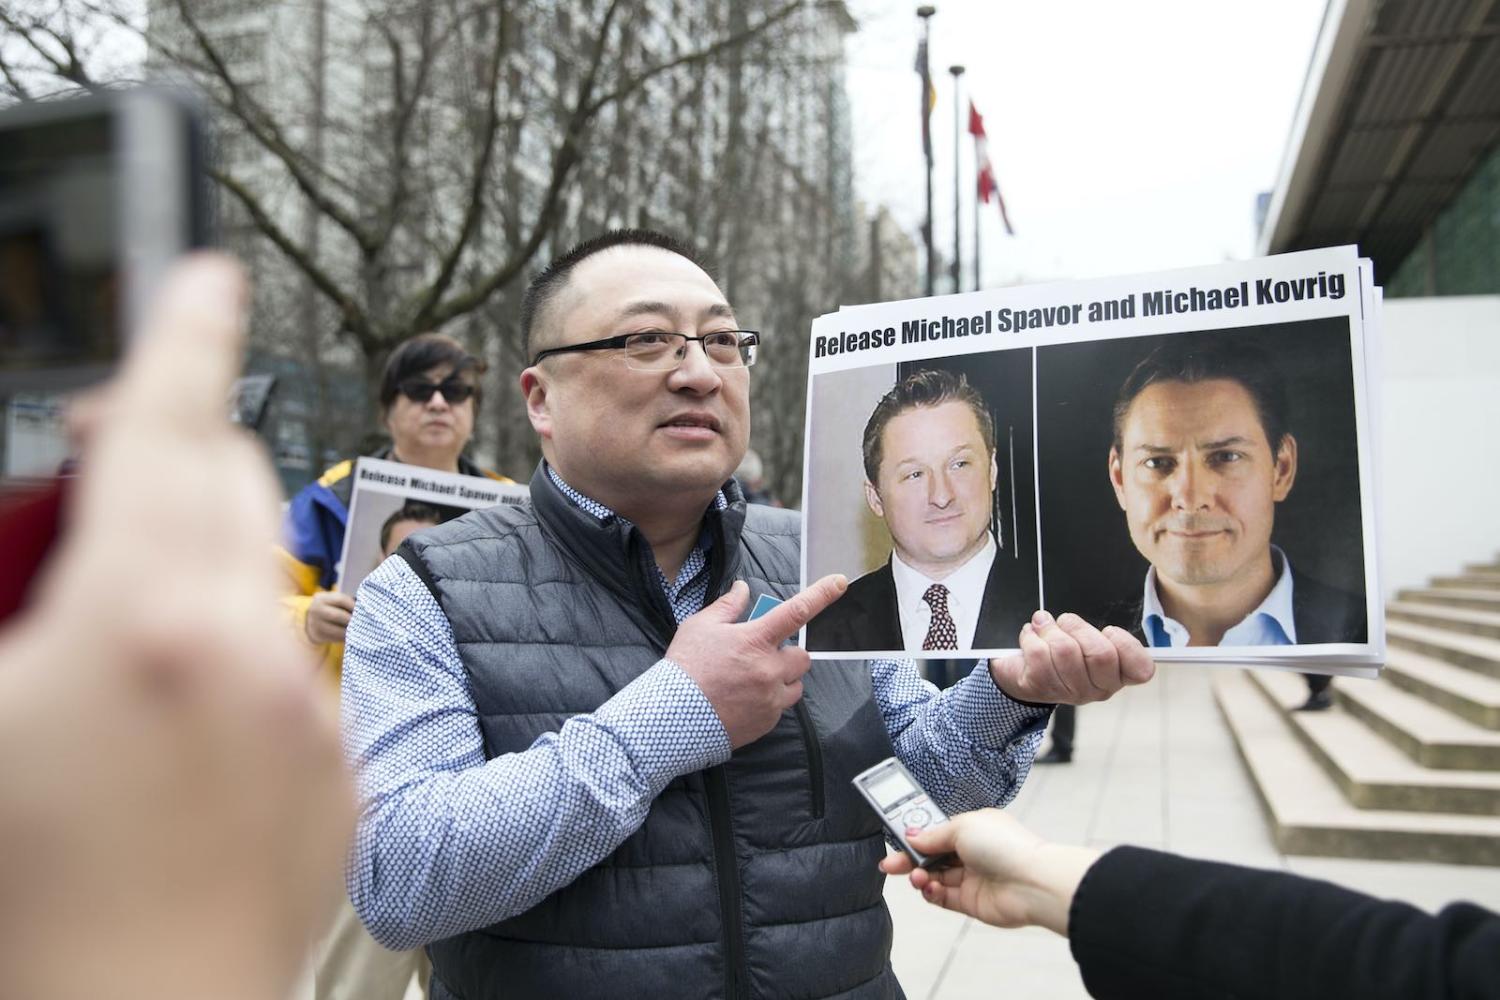 A demonstration in support of Canadians Michael Spavor and Michael Kovrig, detained by China, outside court in Vancouver in March 2019 during an appearance by Huawei Chief Financial Officer Meng Wanzhou (Jason Redmond/AFP via Getty Images)